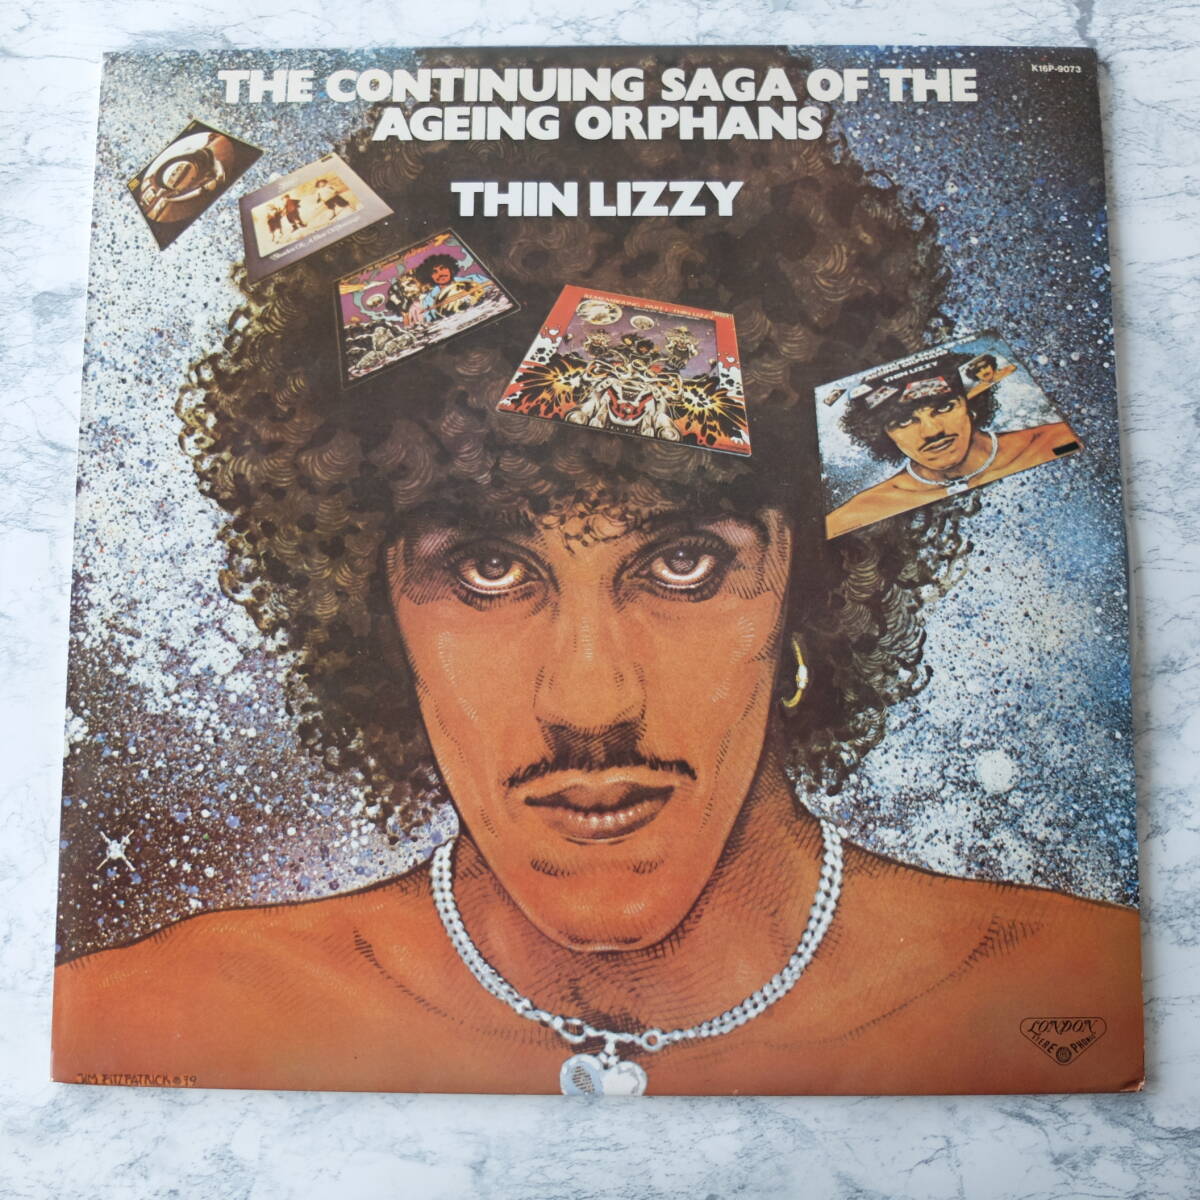 （pa-261）【LP レコード】THIN LIZZY / THE CONTINUING SAGA OF THE AGEING ORPHANS_画像1